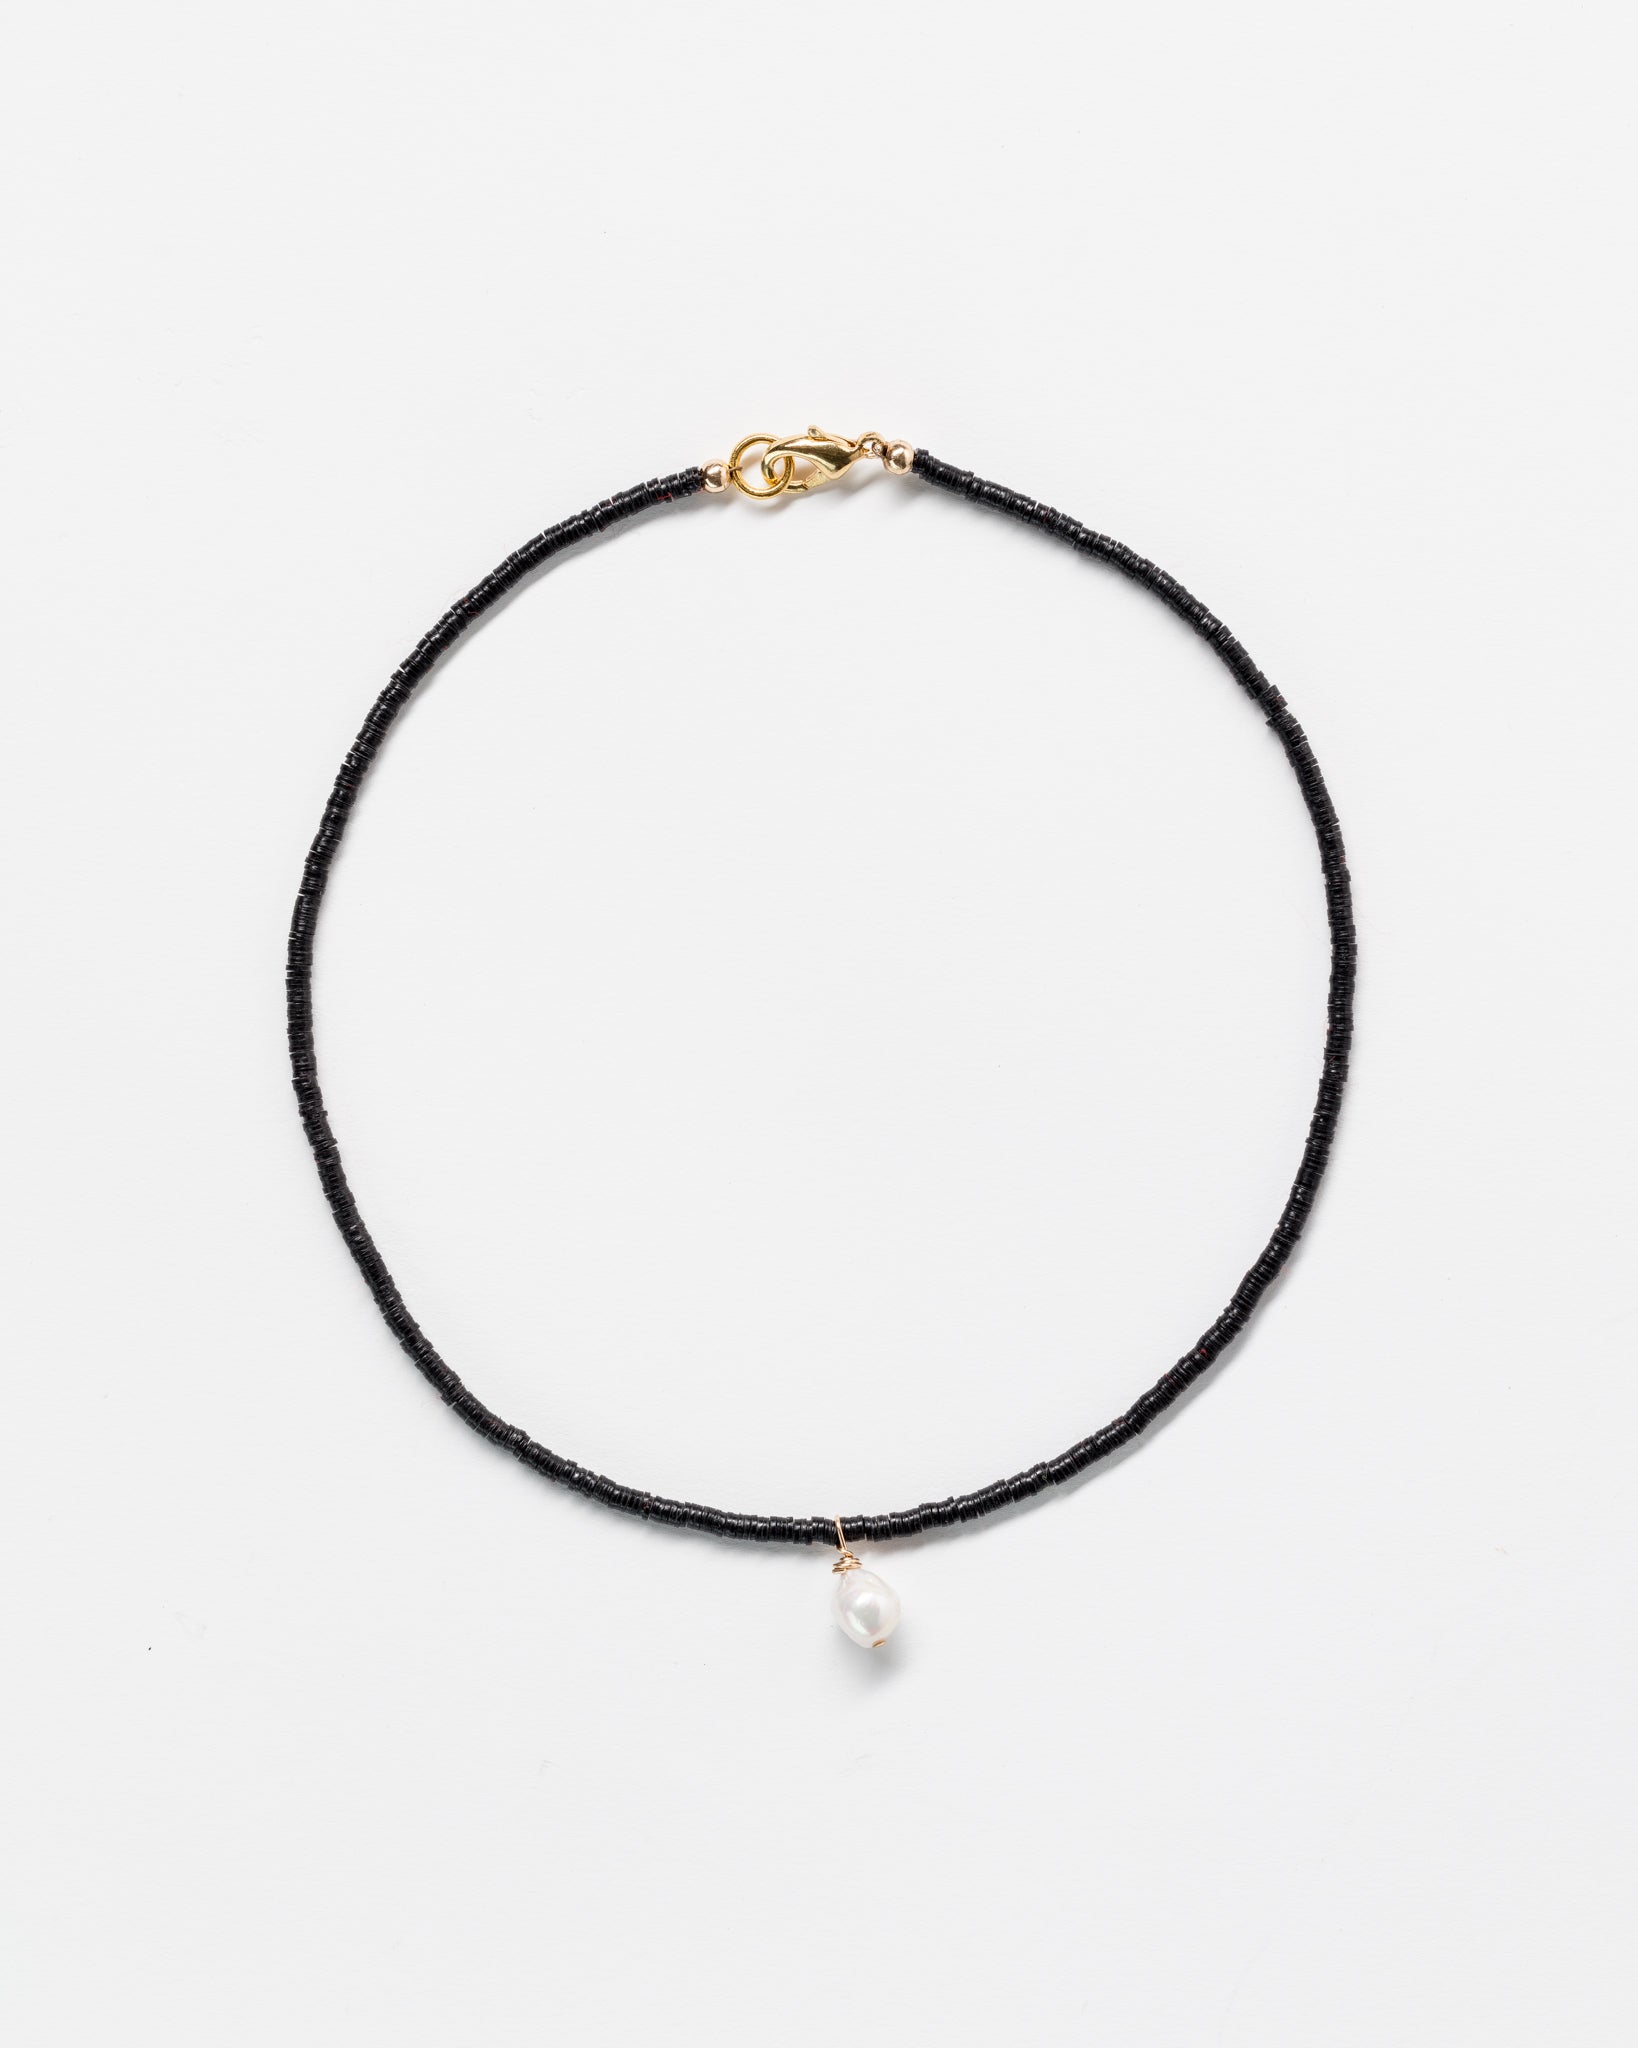 A simple black beaded necklace with a gold clasp and a single white pearl pendant, exhibited in Arizona style on a plain white background, Designs By Raya's multi color designs by raya necklace catches the eye.